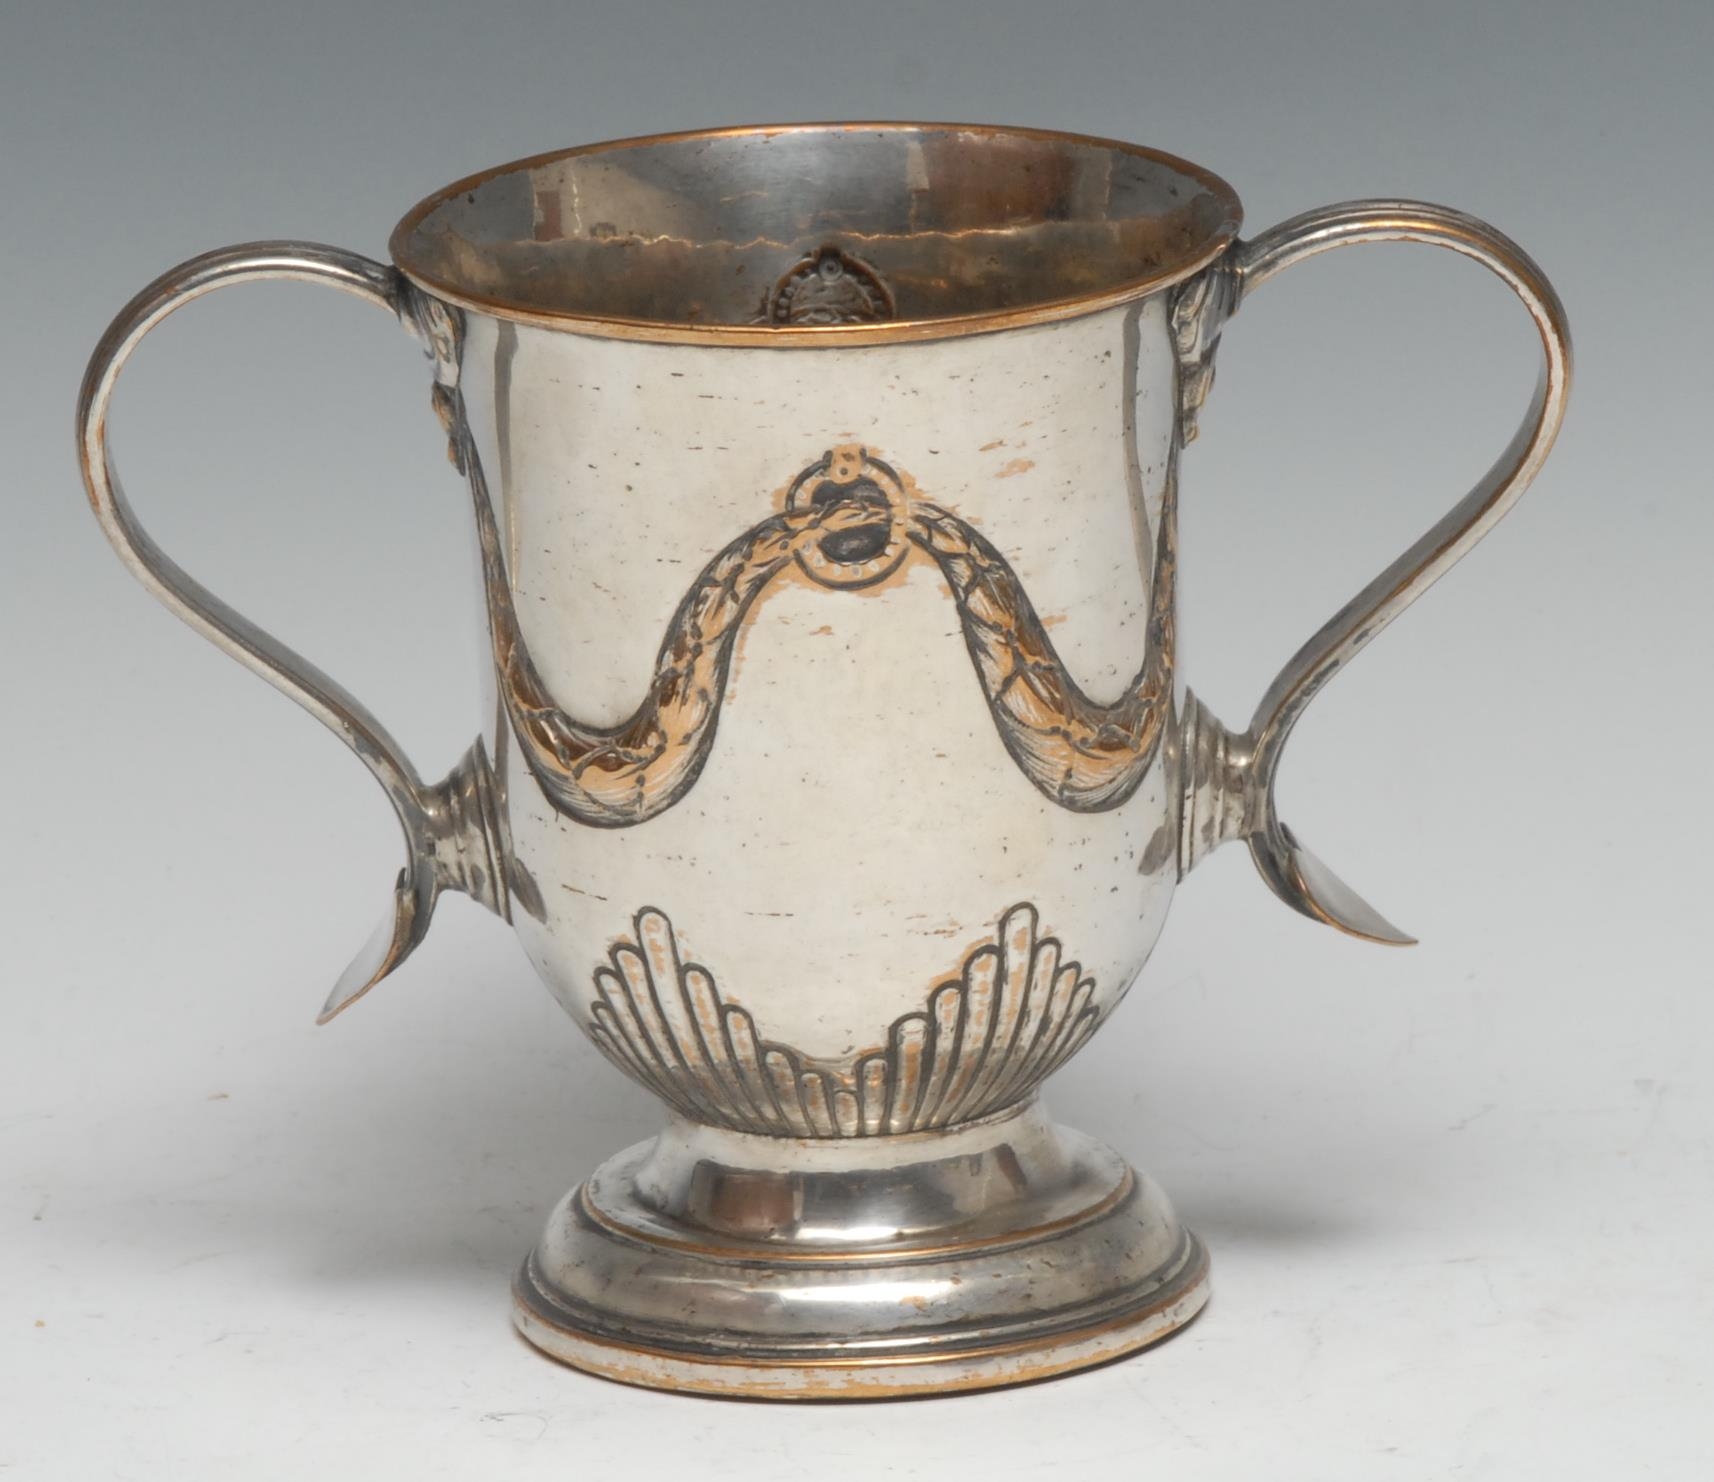 A George III Old Sheffield Plate loving cup, hal-fluted and chased with swags, scroll handles with